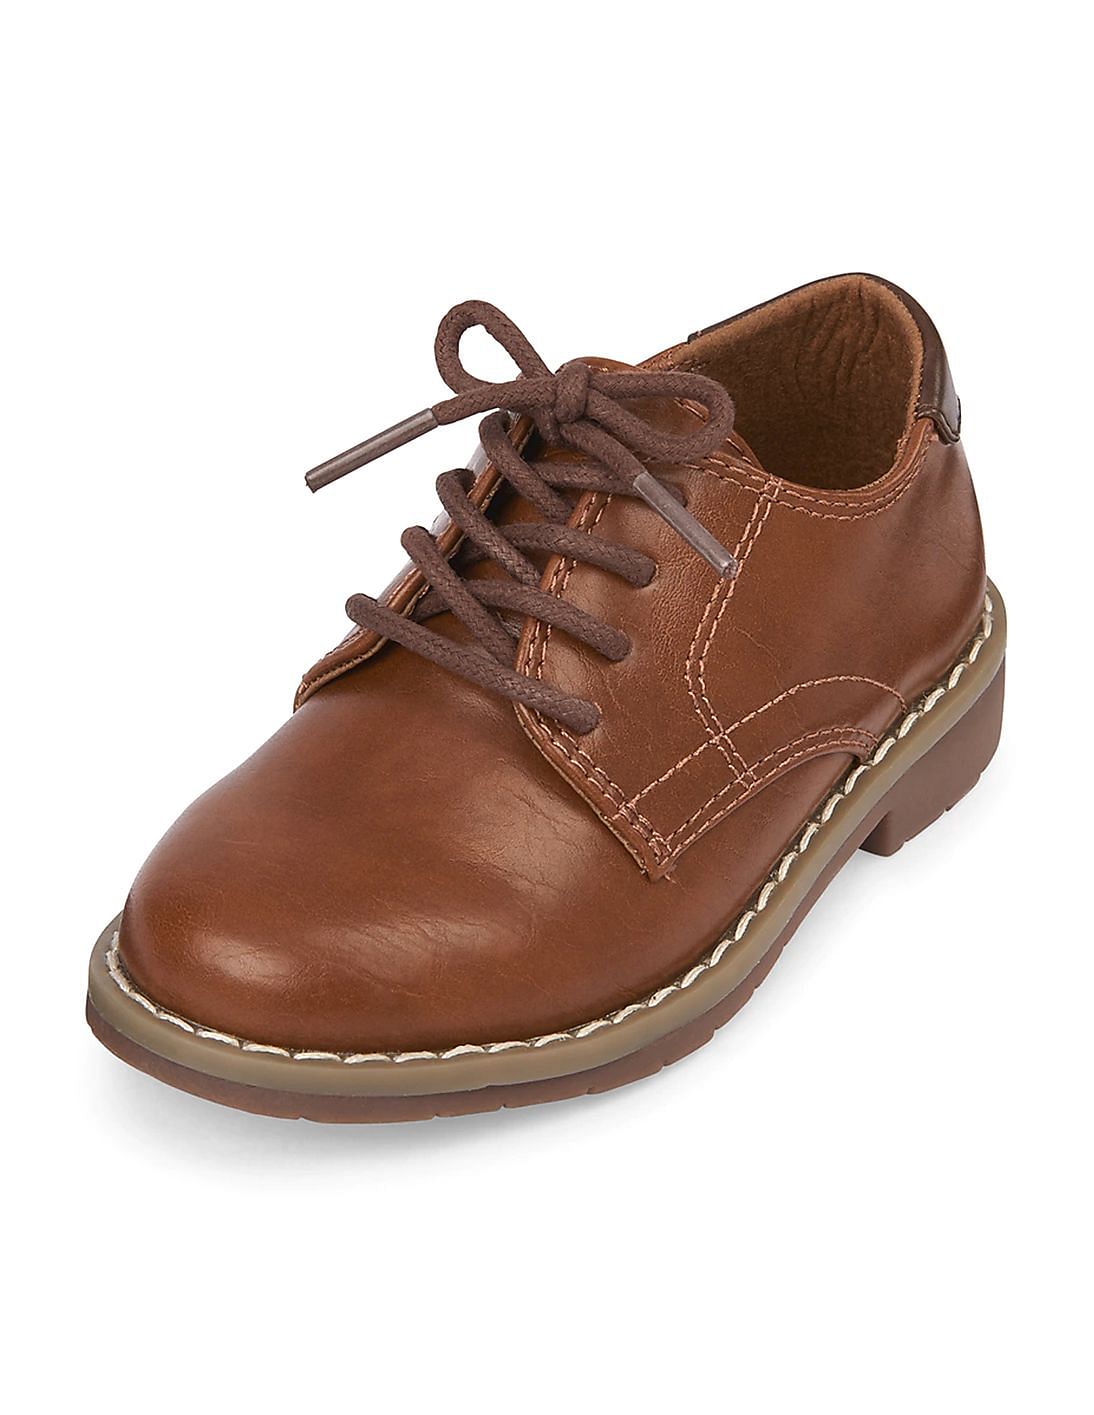 oxford shoes for toddlers